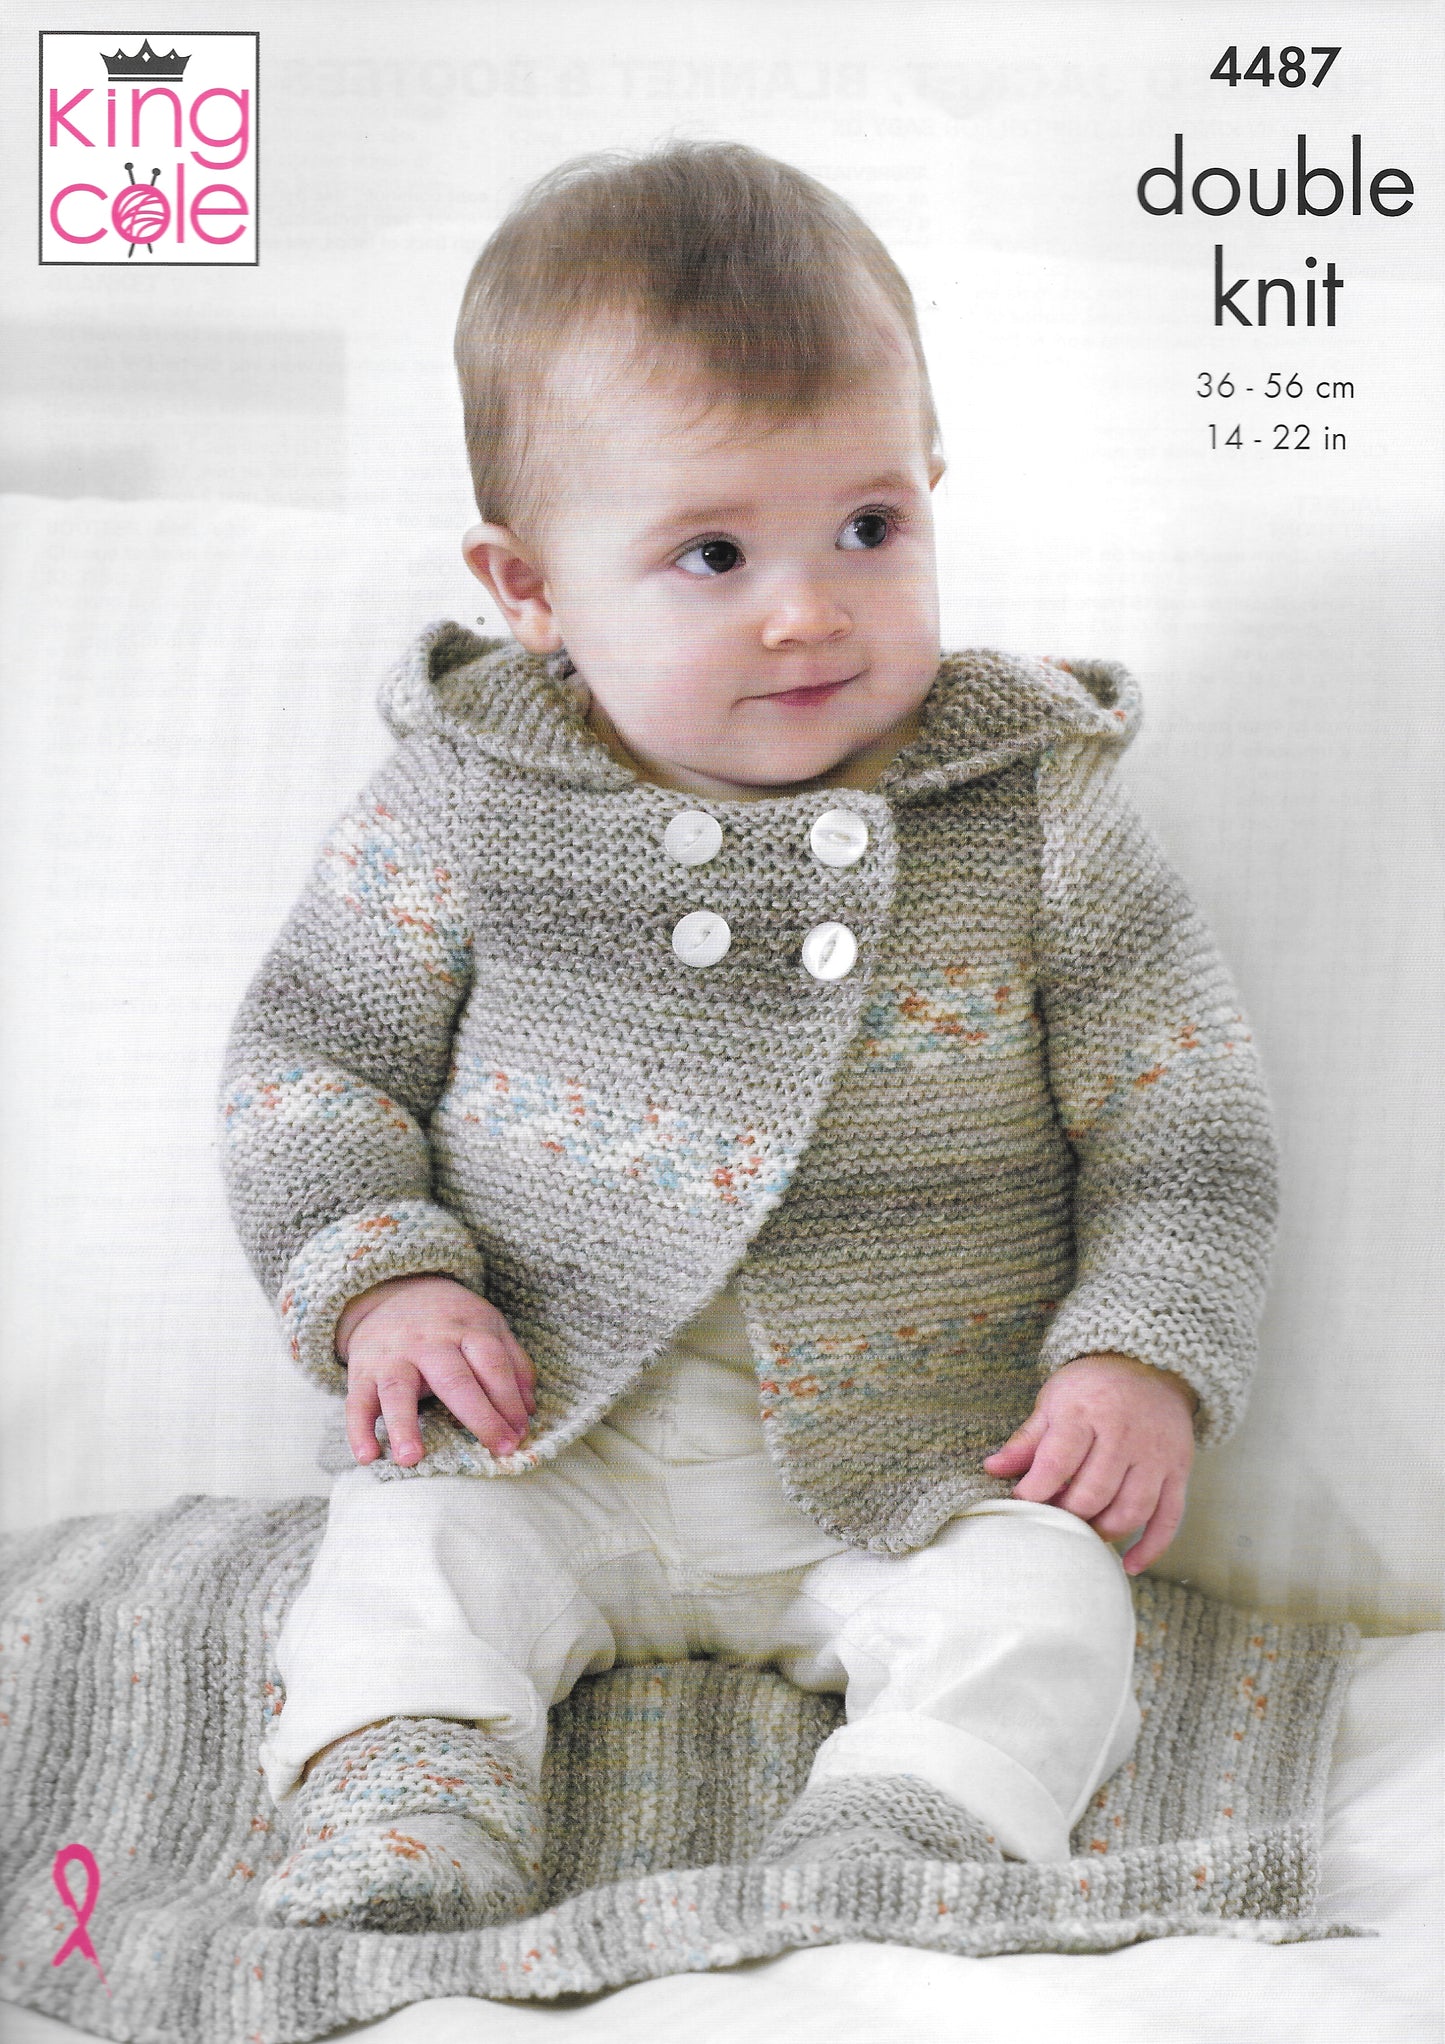 4487 King Cole Double Knit Hooded Jacket, Bootees and Blanket knitting pattern